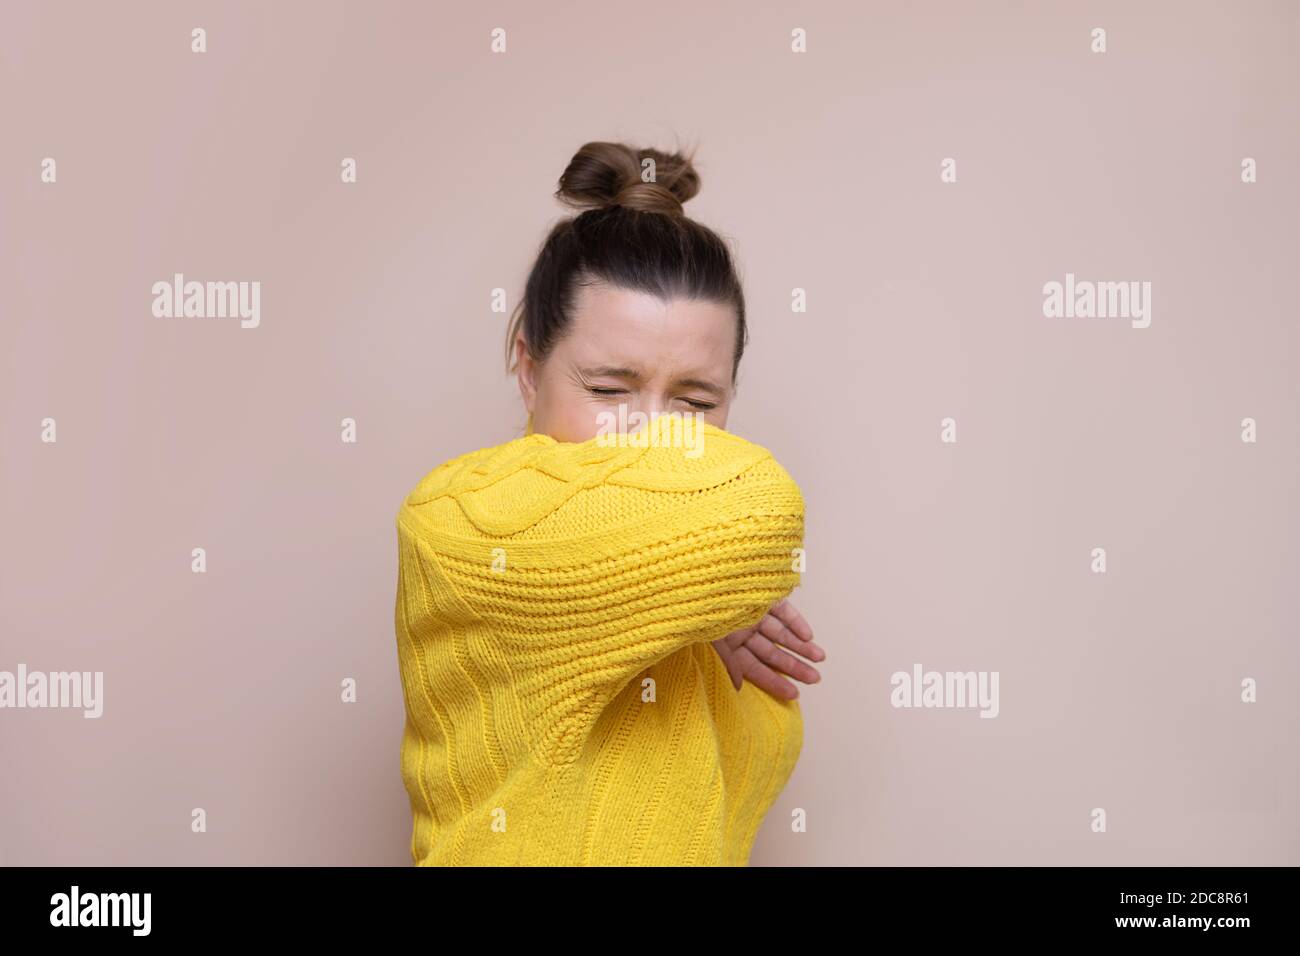 Photo of woman in a yellow sweater with a bun on her head on a pink background. Sneezes or coughs into the elbow. Safety concept, culture of behavior Stock Photo